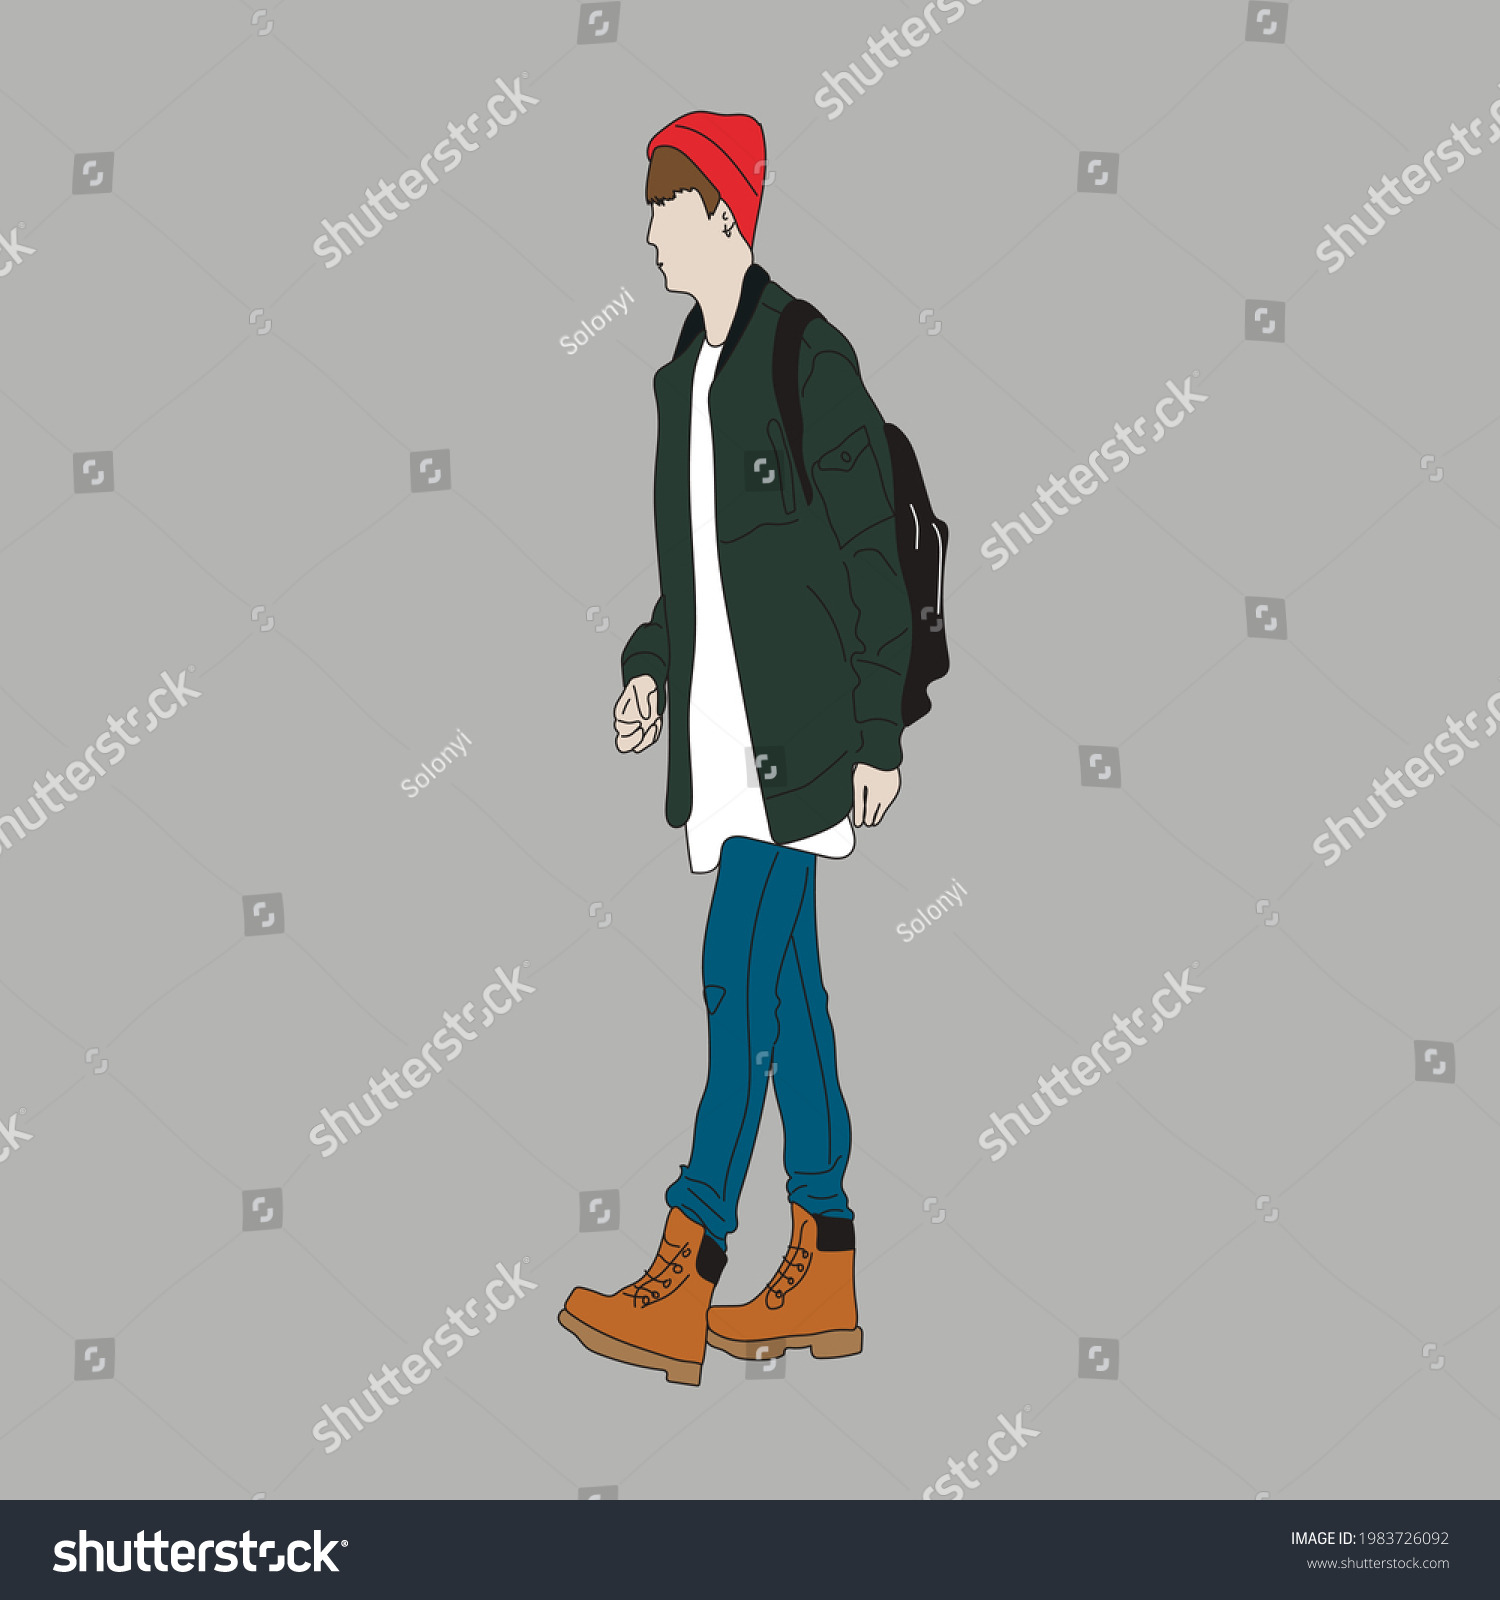 SVG of Vector illustration of Kpop street fashion. Street idols of Koreans. Kpop men's fashion idol. A guy in a green jacket and blue jeans. svg